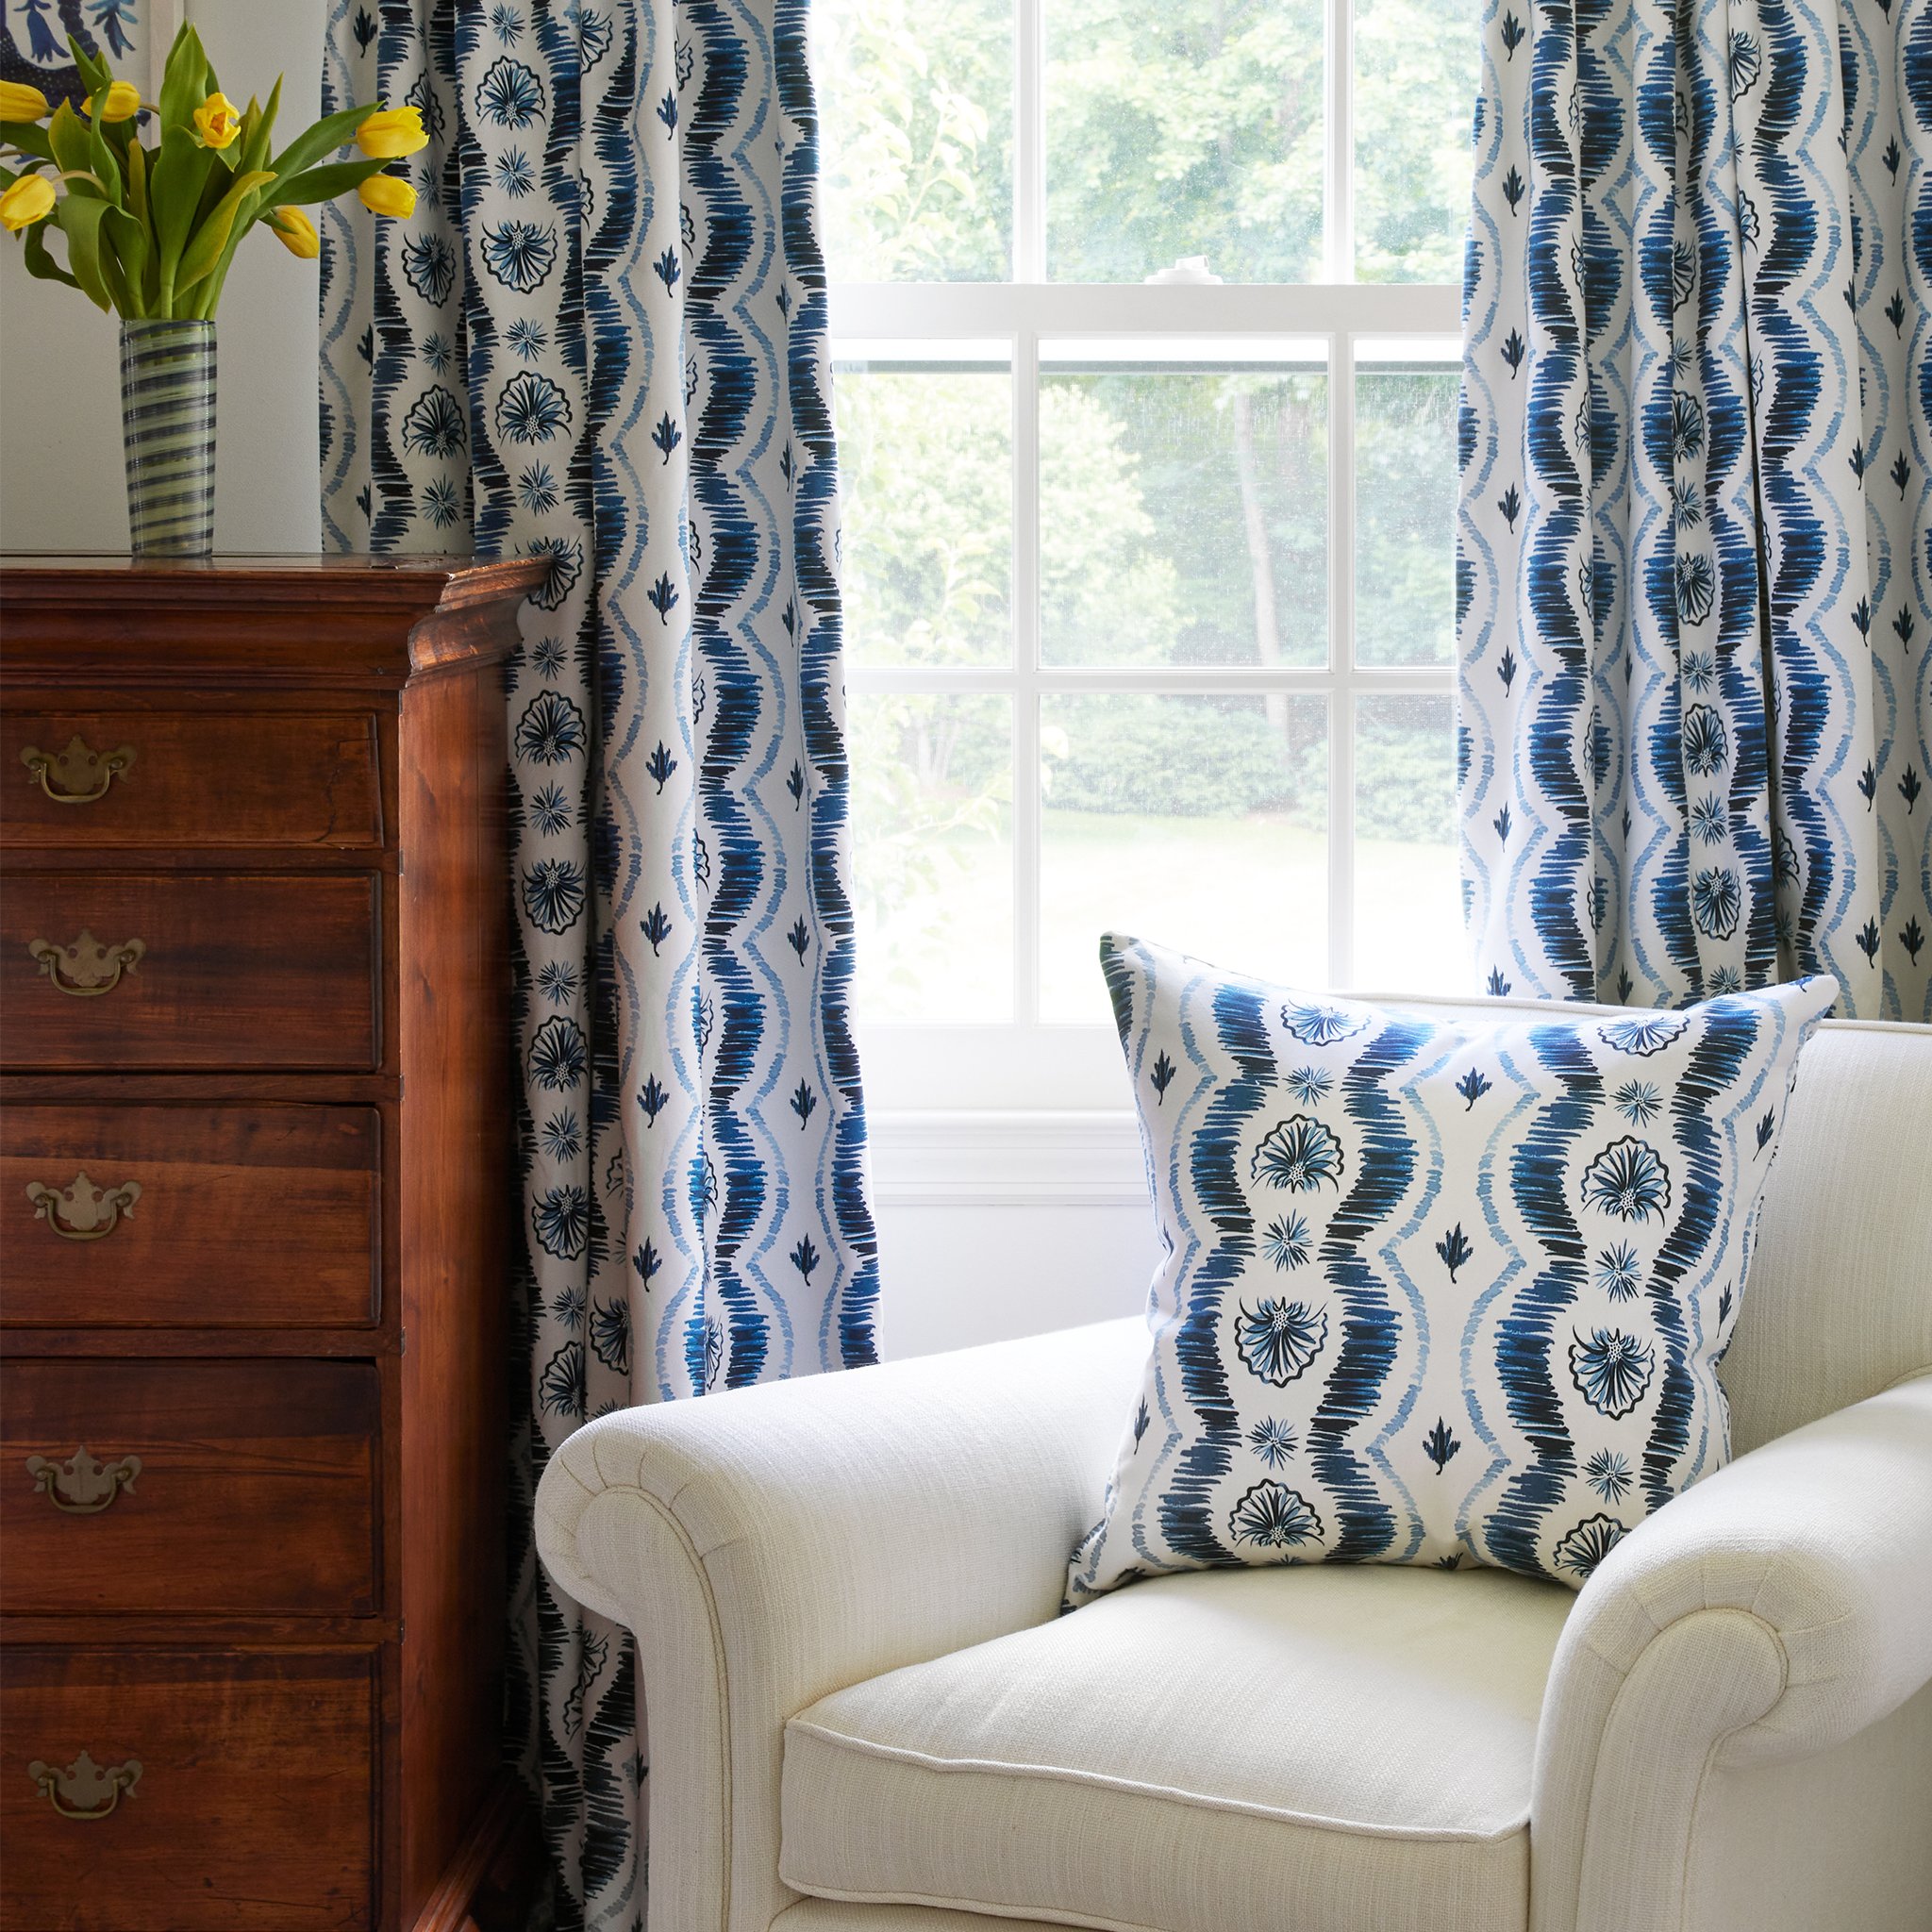 Blue Ikat pillow on couch with Blue Ikat striped curtains by a nightstand with a flower vase